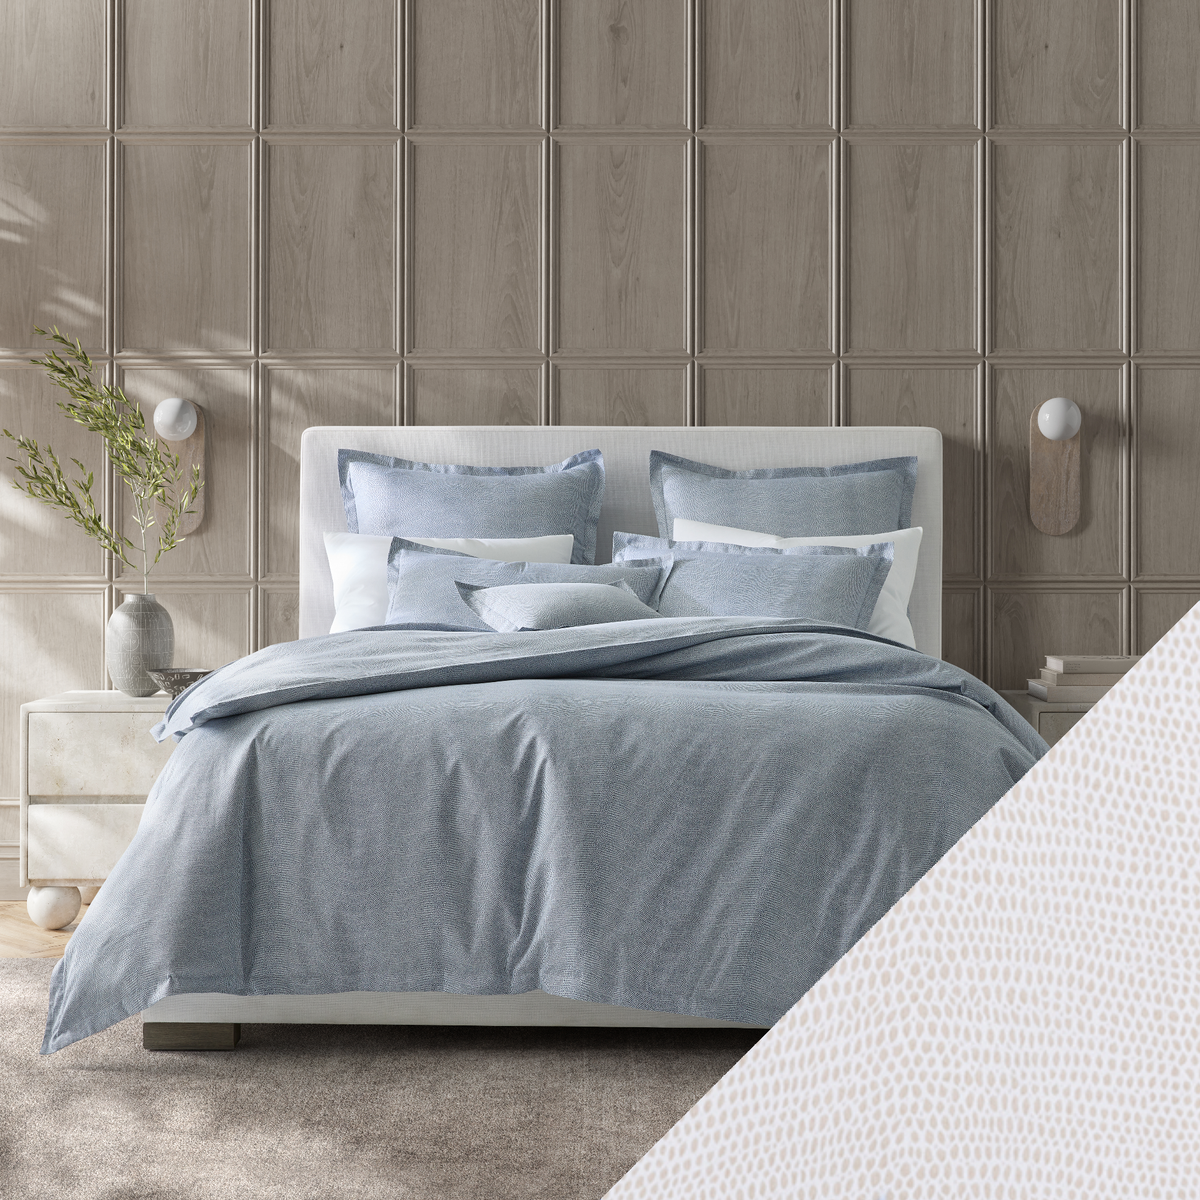 Full Bed Dressed in Steel Blue Matouk Jasper Bedding with Dune Swatch